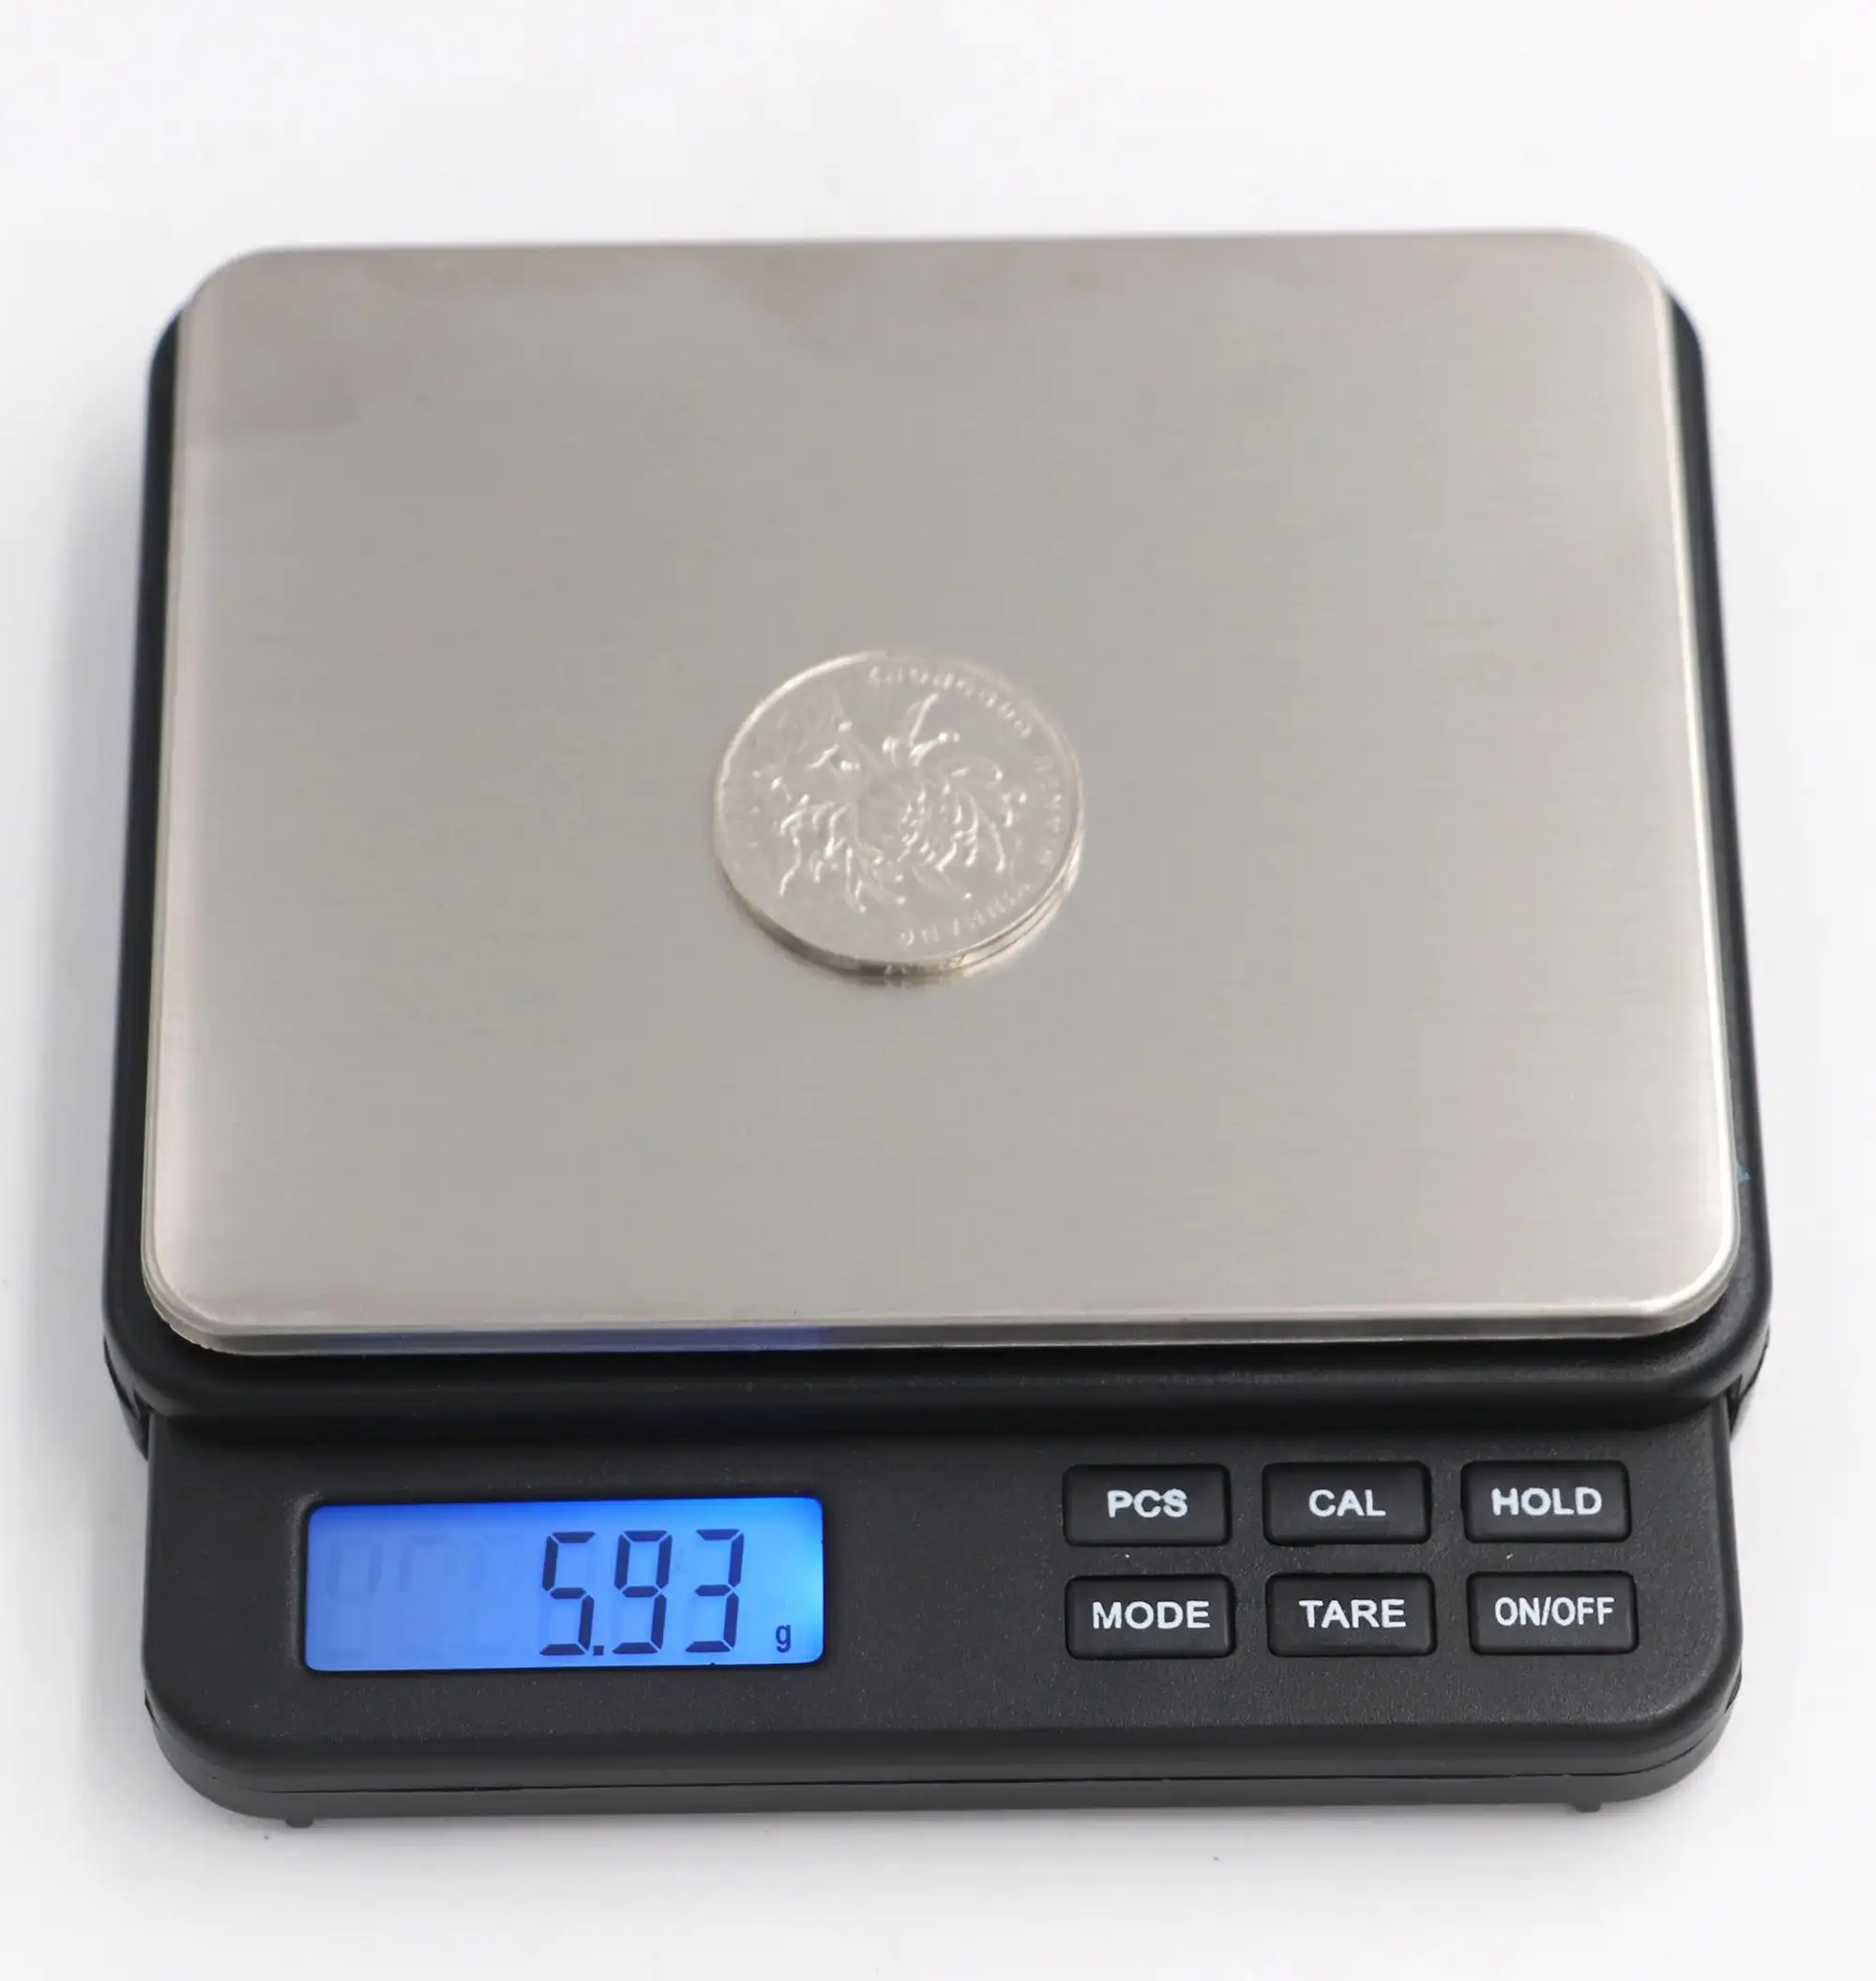 1000g x 0.01g Wholesale Digital Pocket Scales in Grams For Jewelry Gold Weight